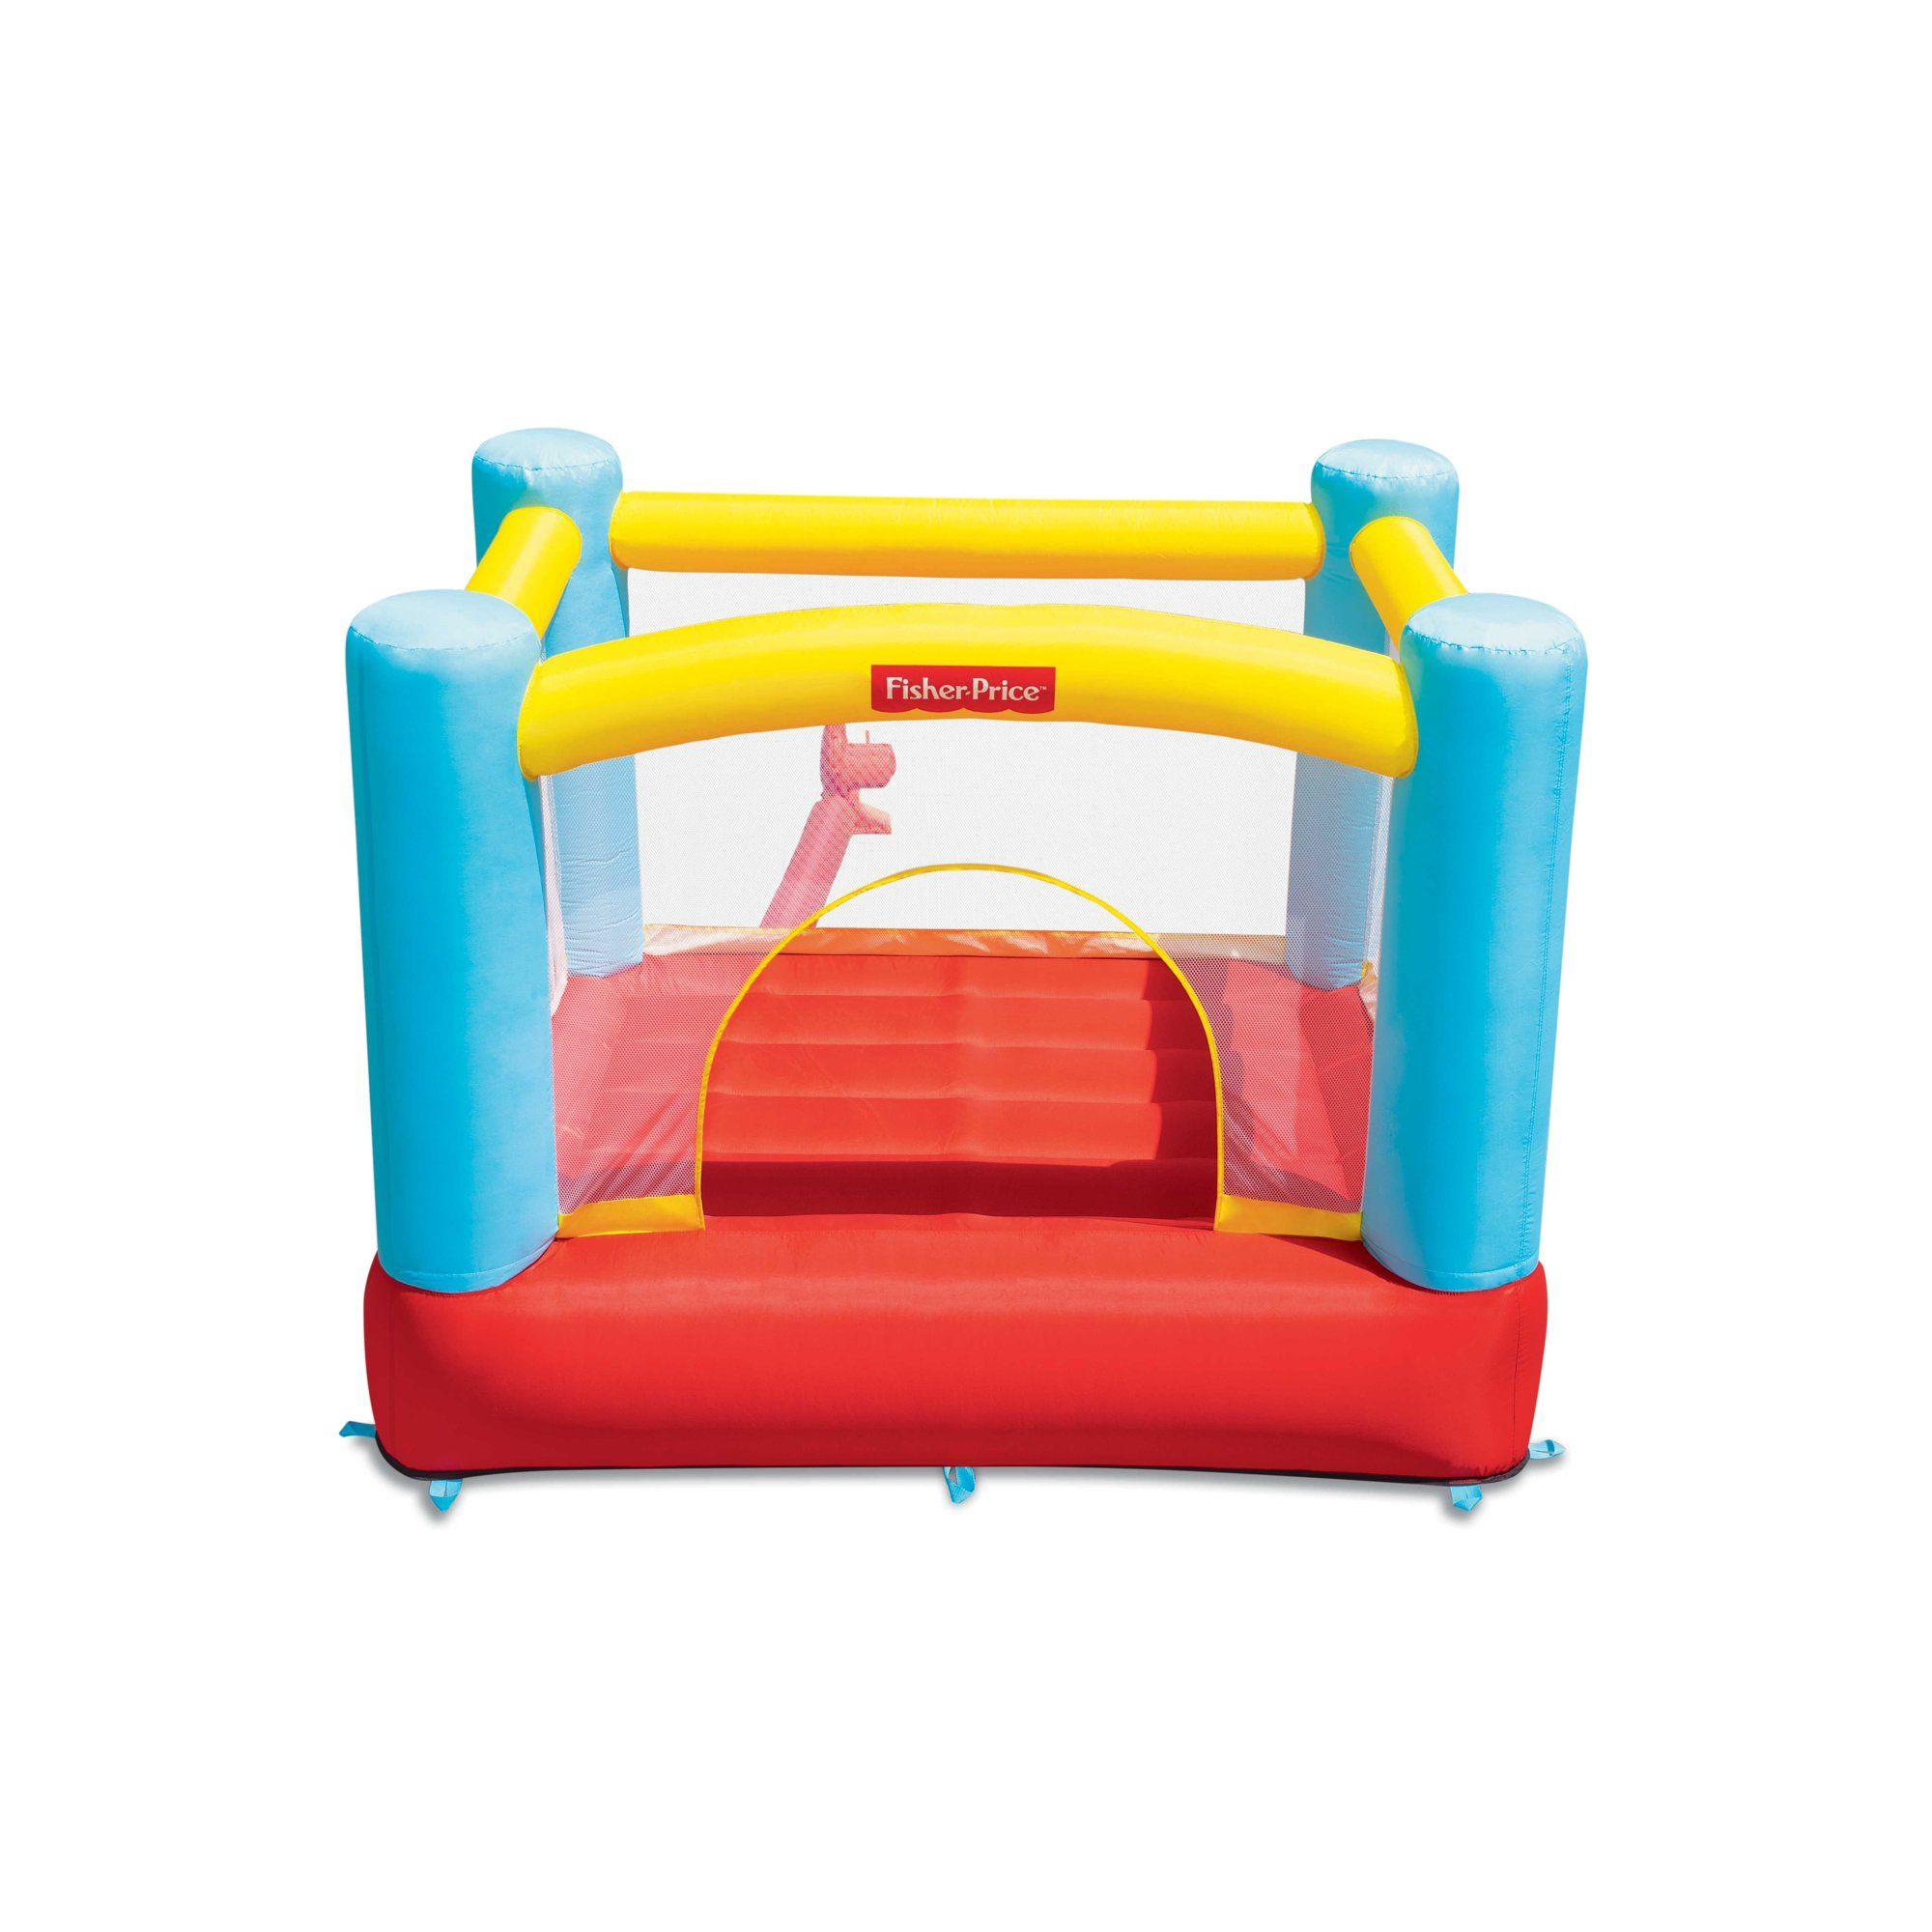 Fisher Price Bouncetacular Inflatable Bounce House, Ages 3-8 | Walmart (US)